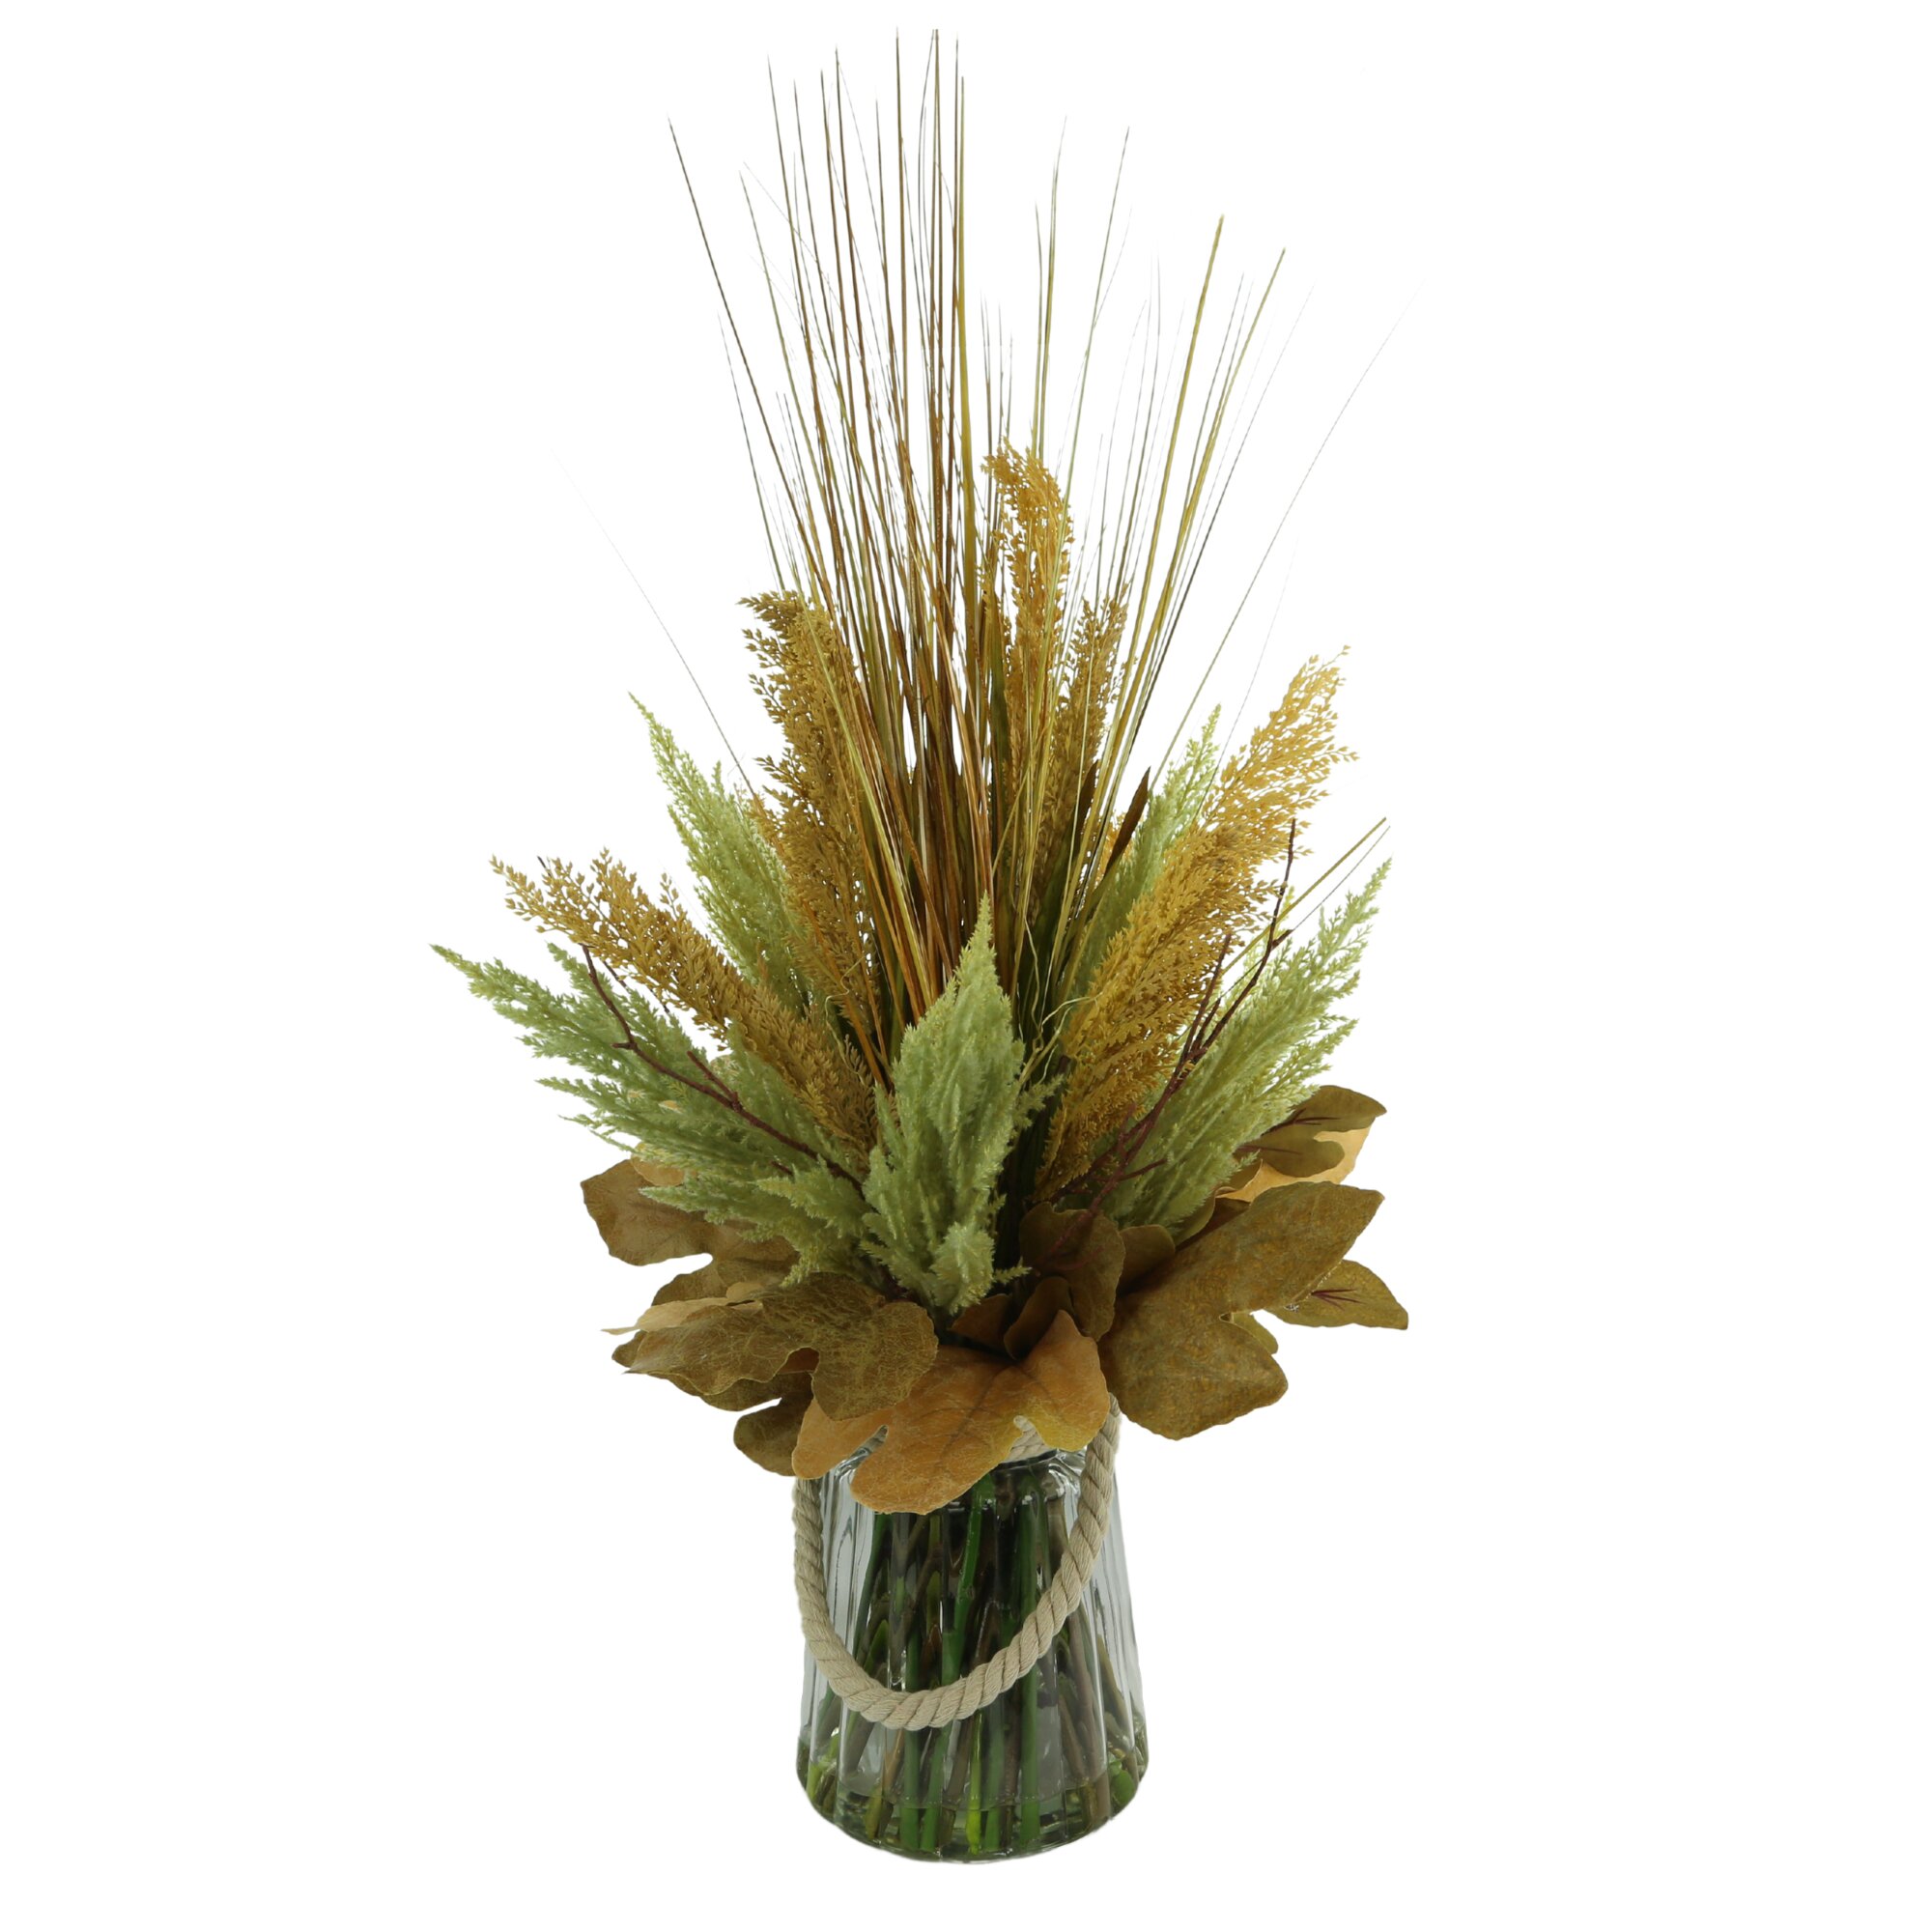 Mixed Pampas in A Vase Creative Displays, Inc.